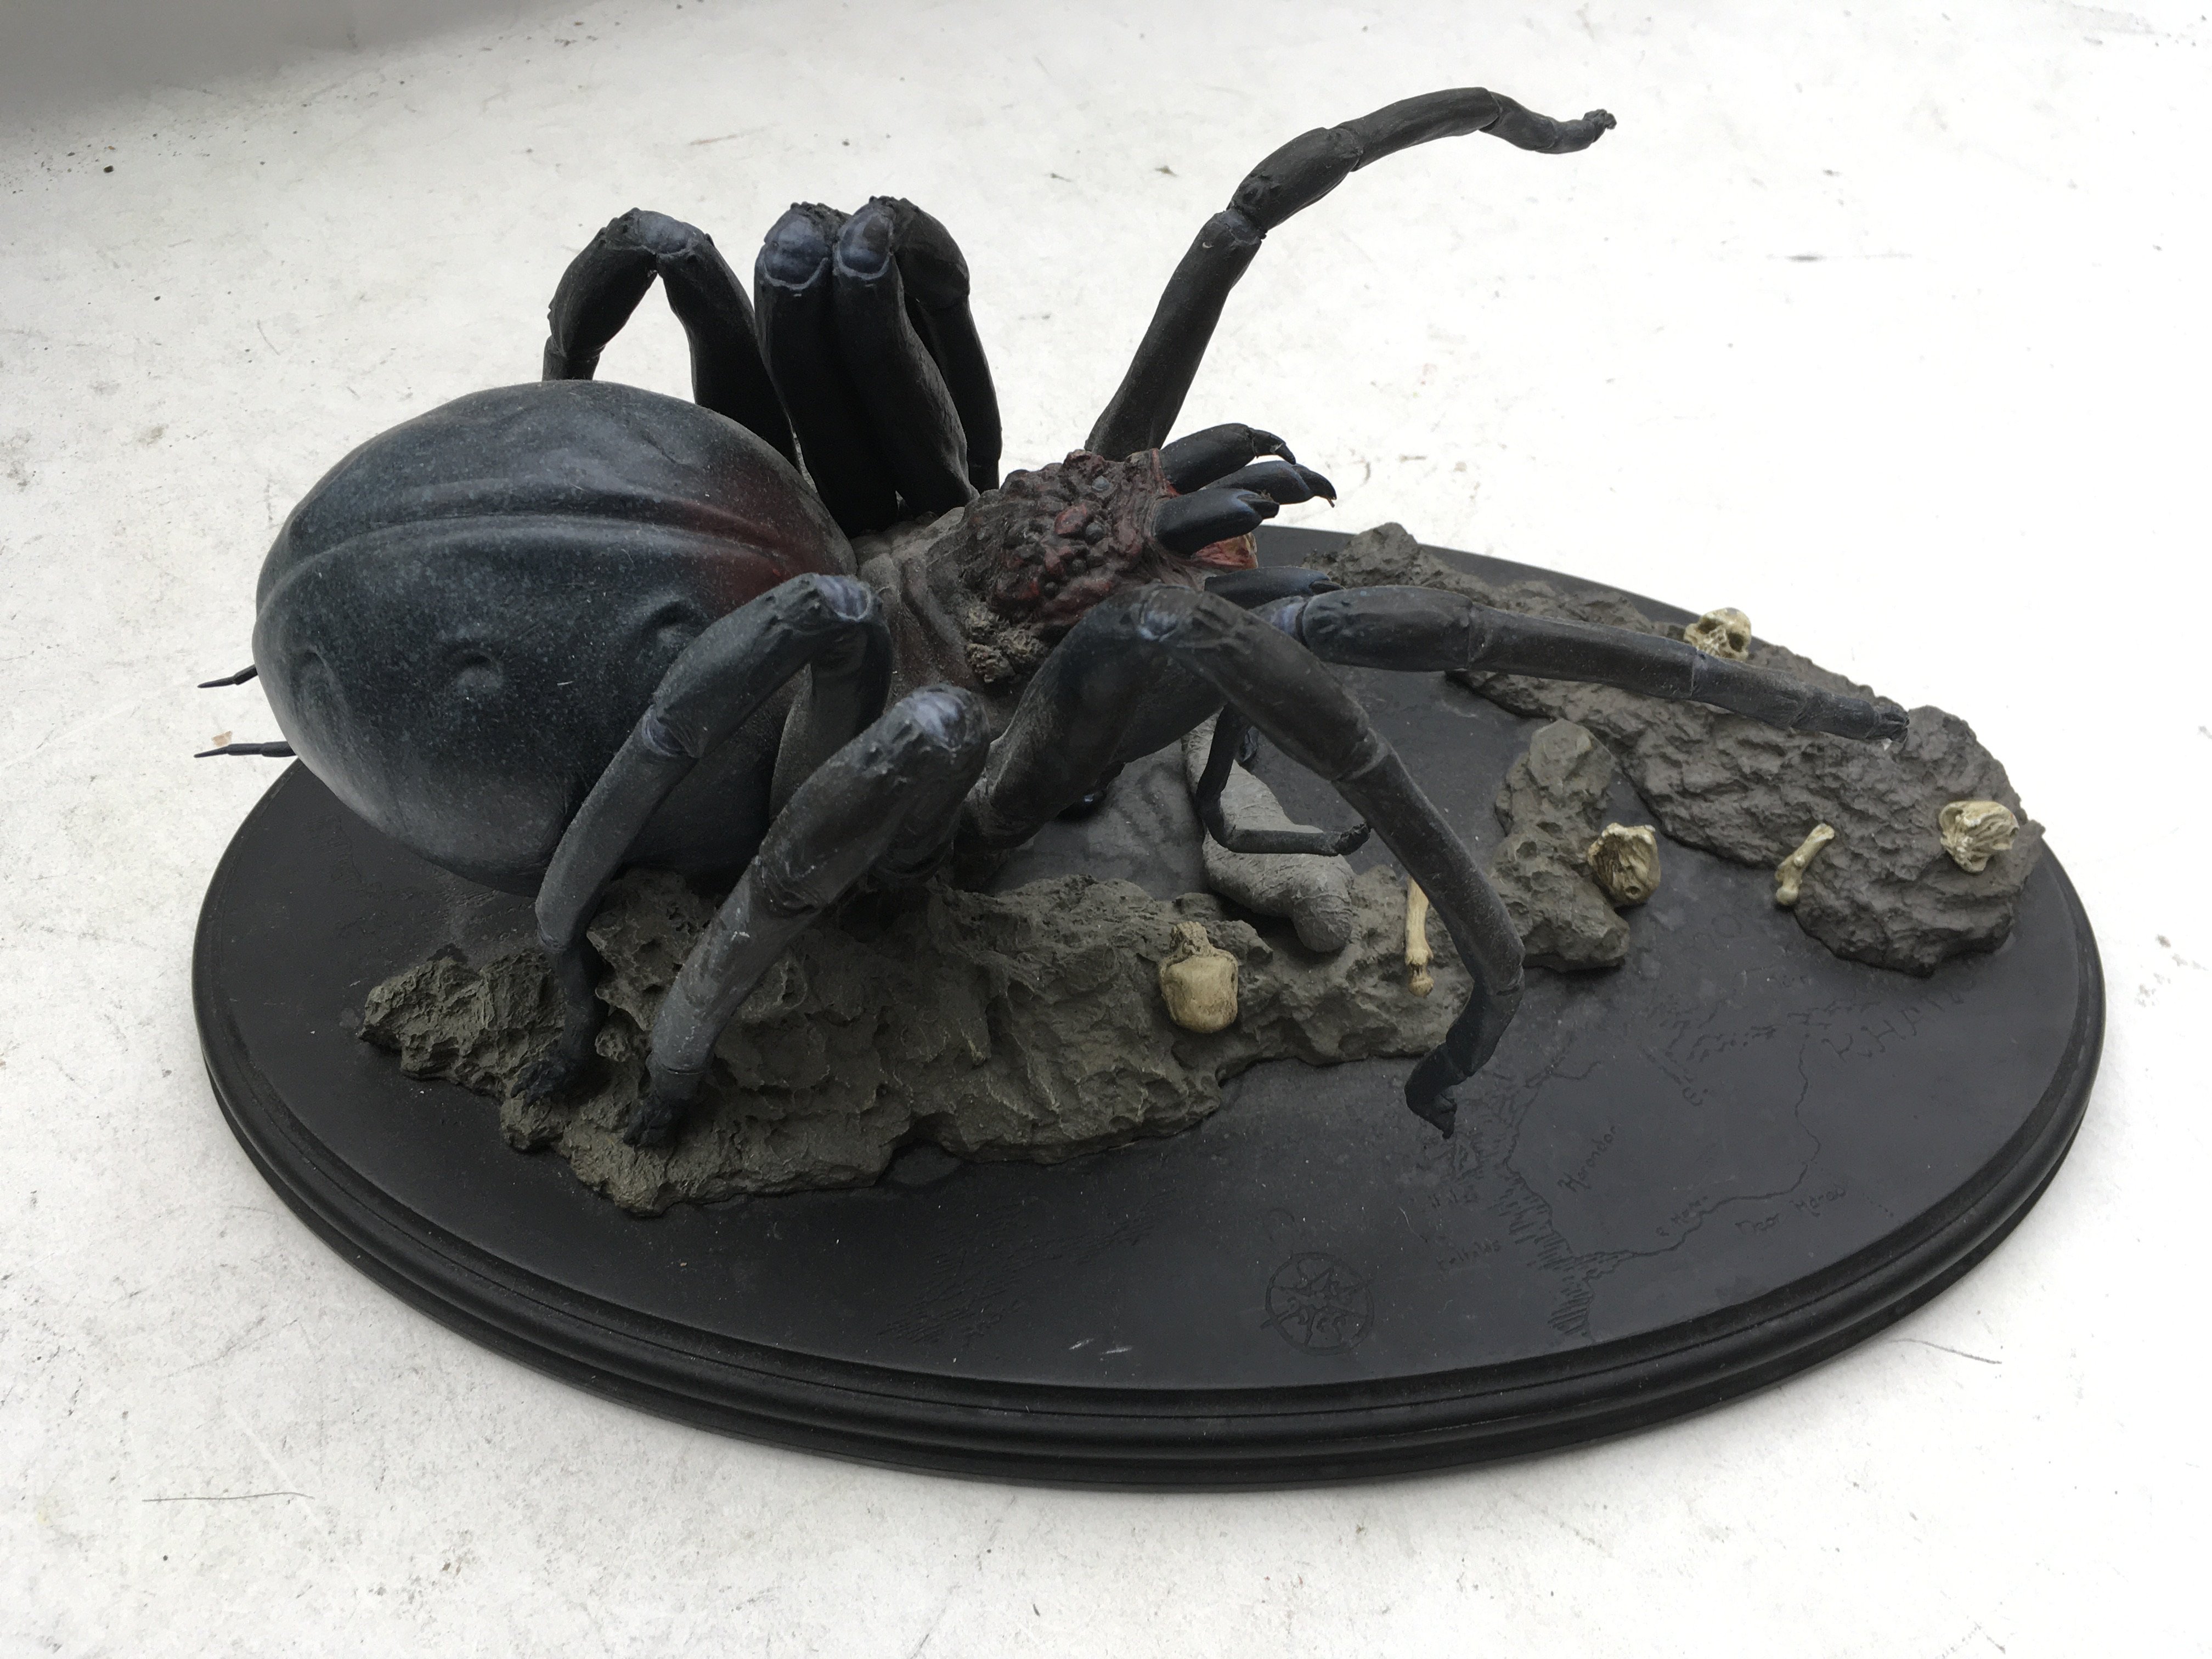 Lord of the rings, The Return of the king, Sideshow figure , Shelob, unboxed with slight damage